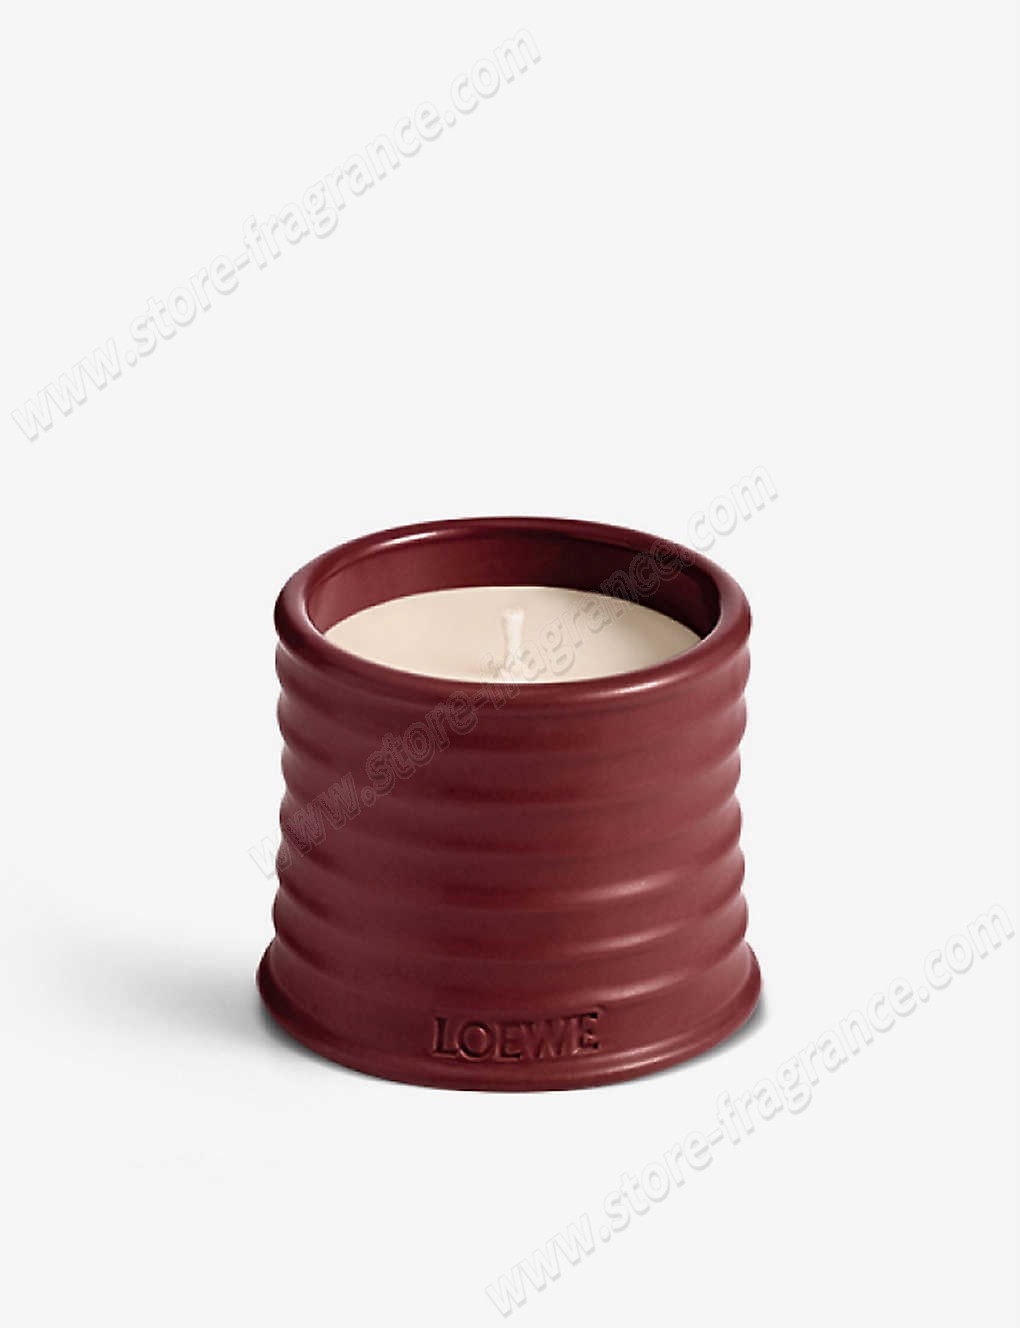 LOEWE/Beetroot small scented candle 170g ✿ Discount Store - -0